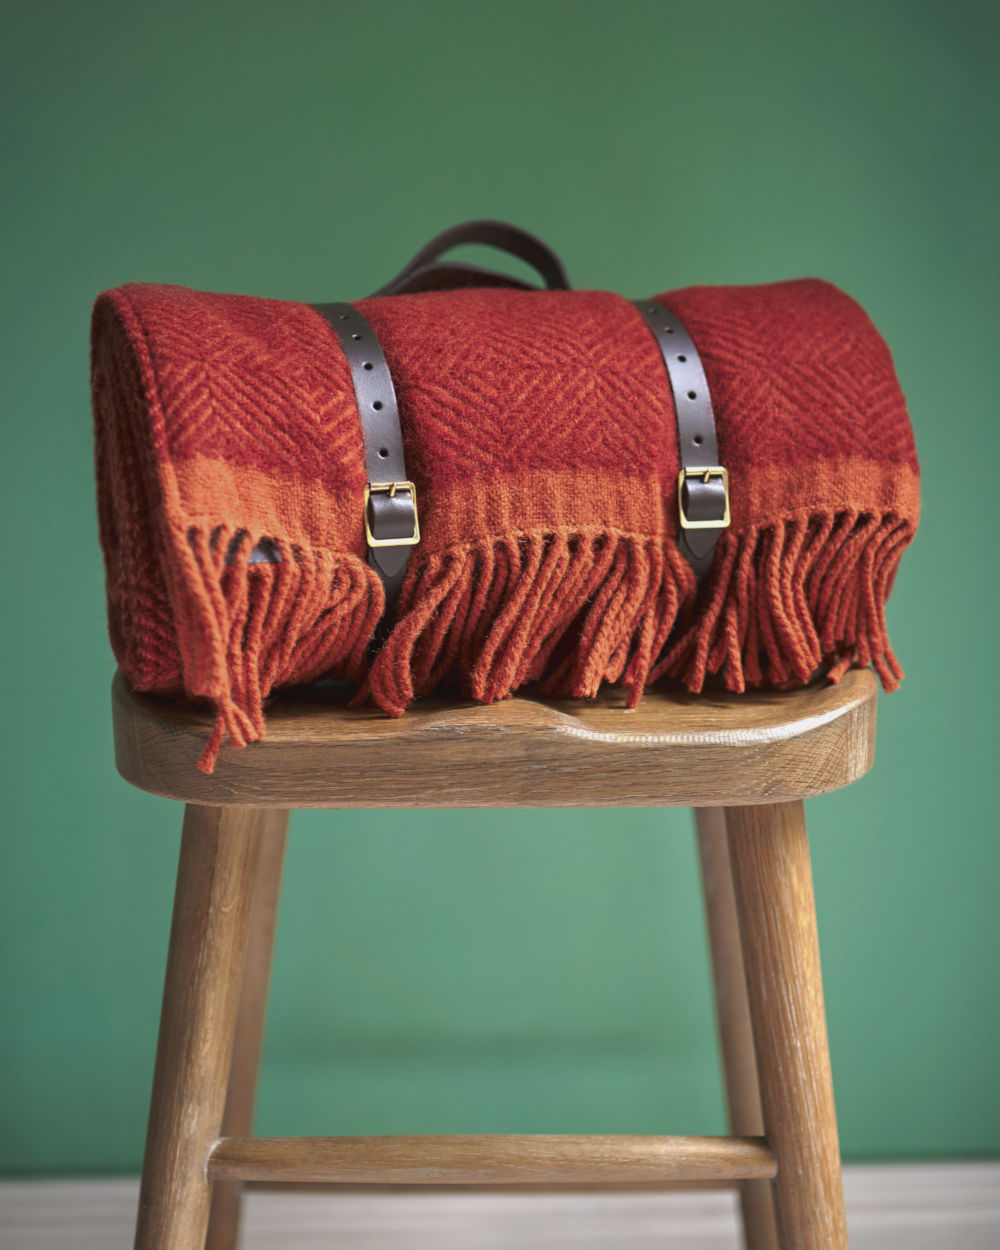 Red wool picnic blanket with leather straps on stool from The British Blanket Company